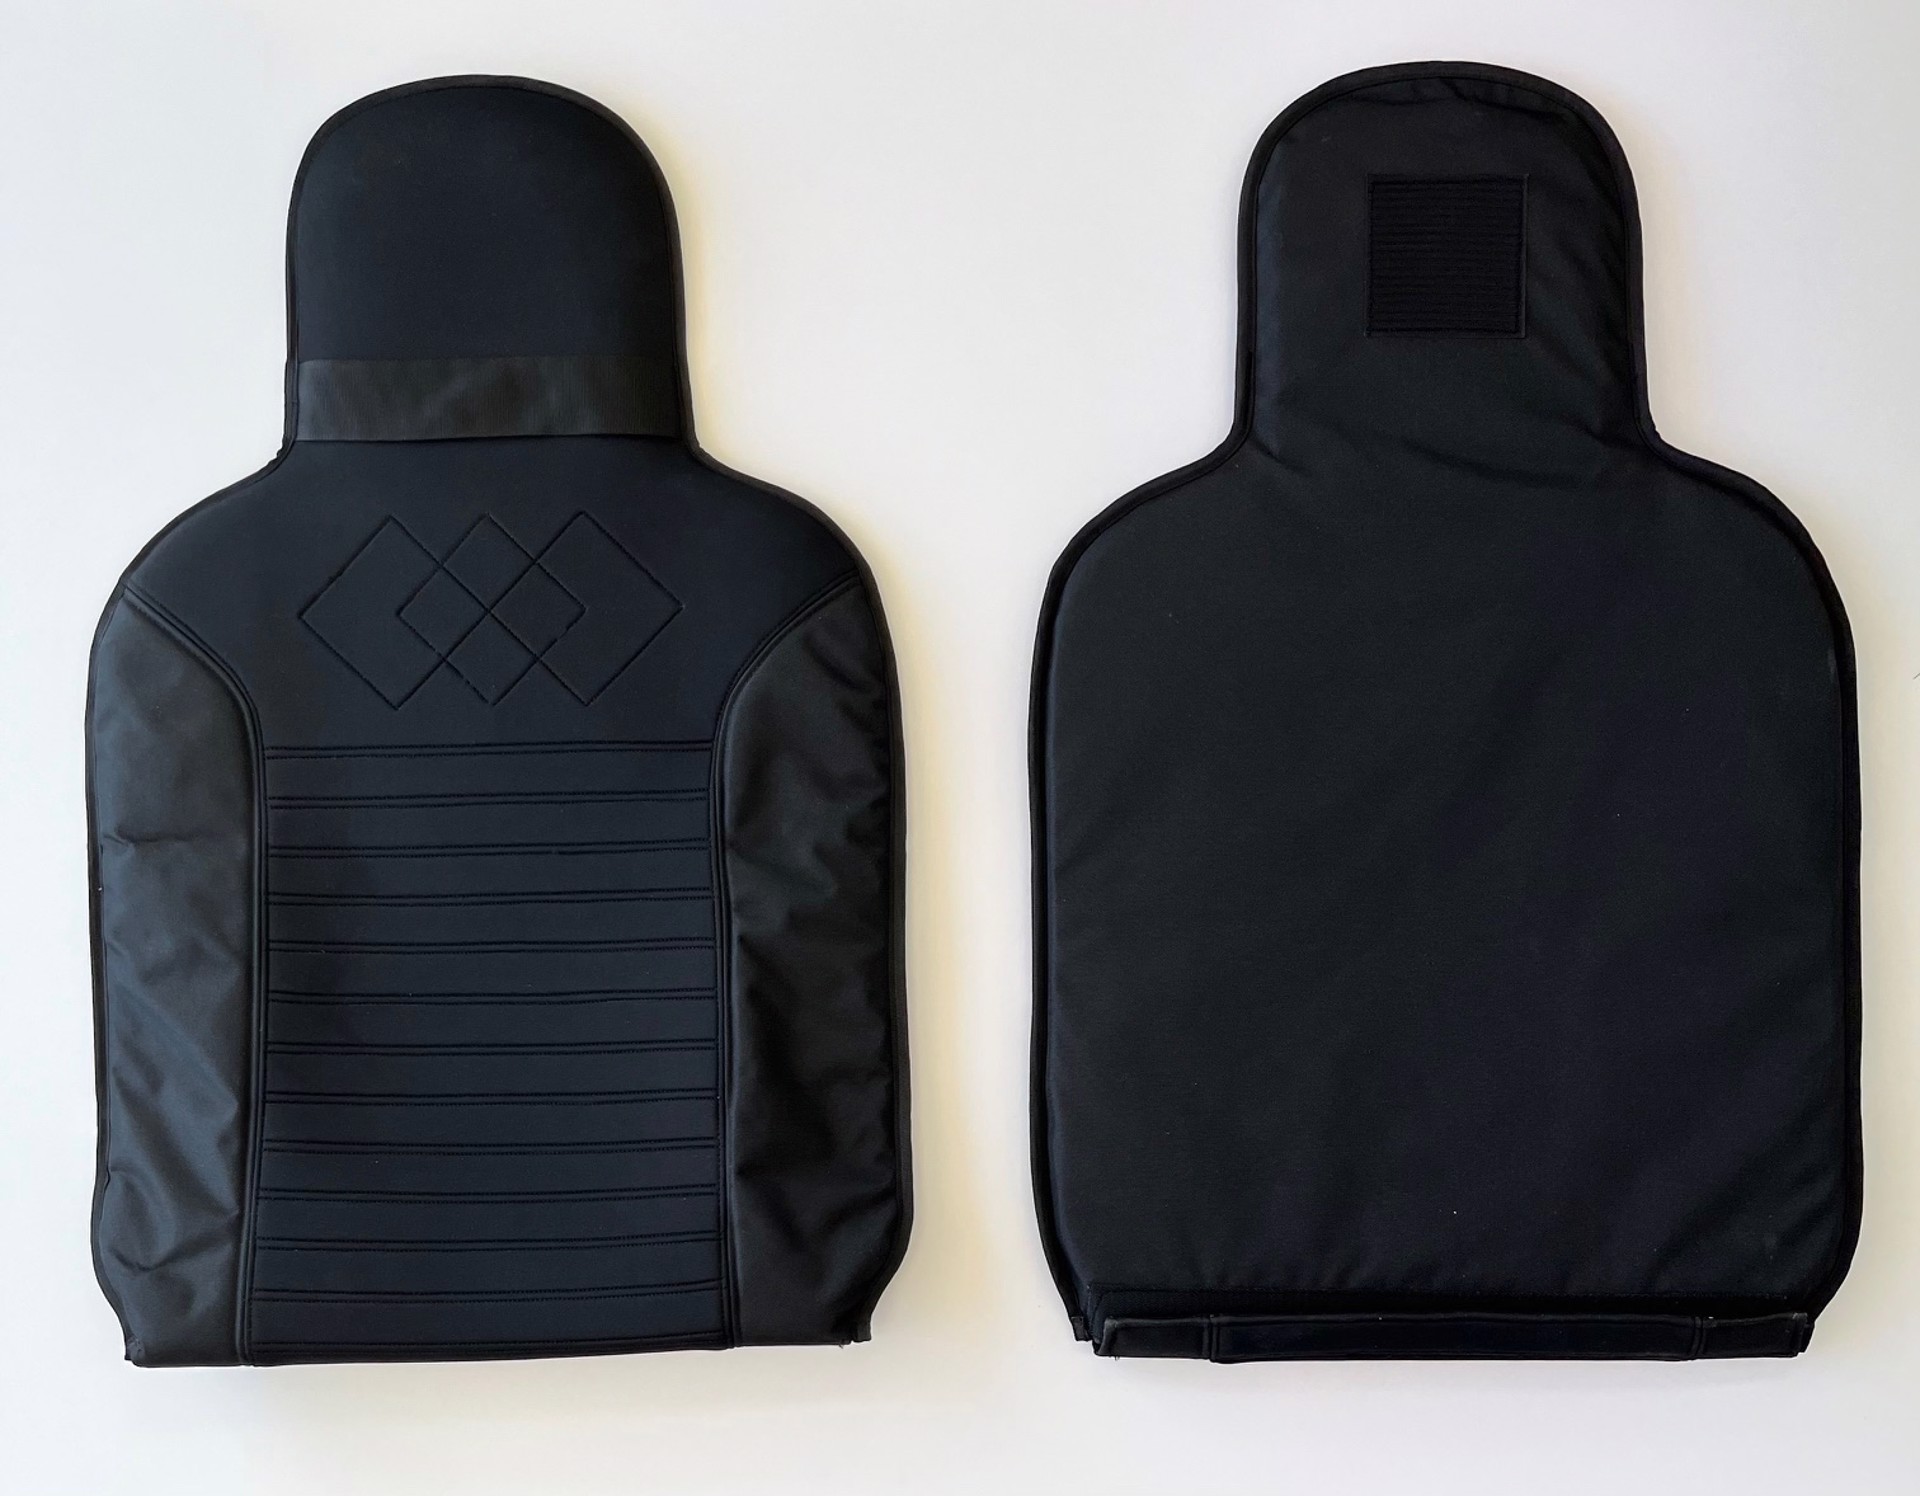 Bullet Resistant Seat Back Shield by Functional Art